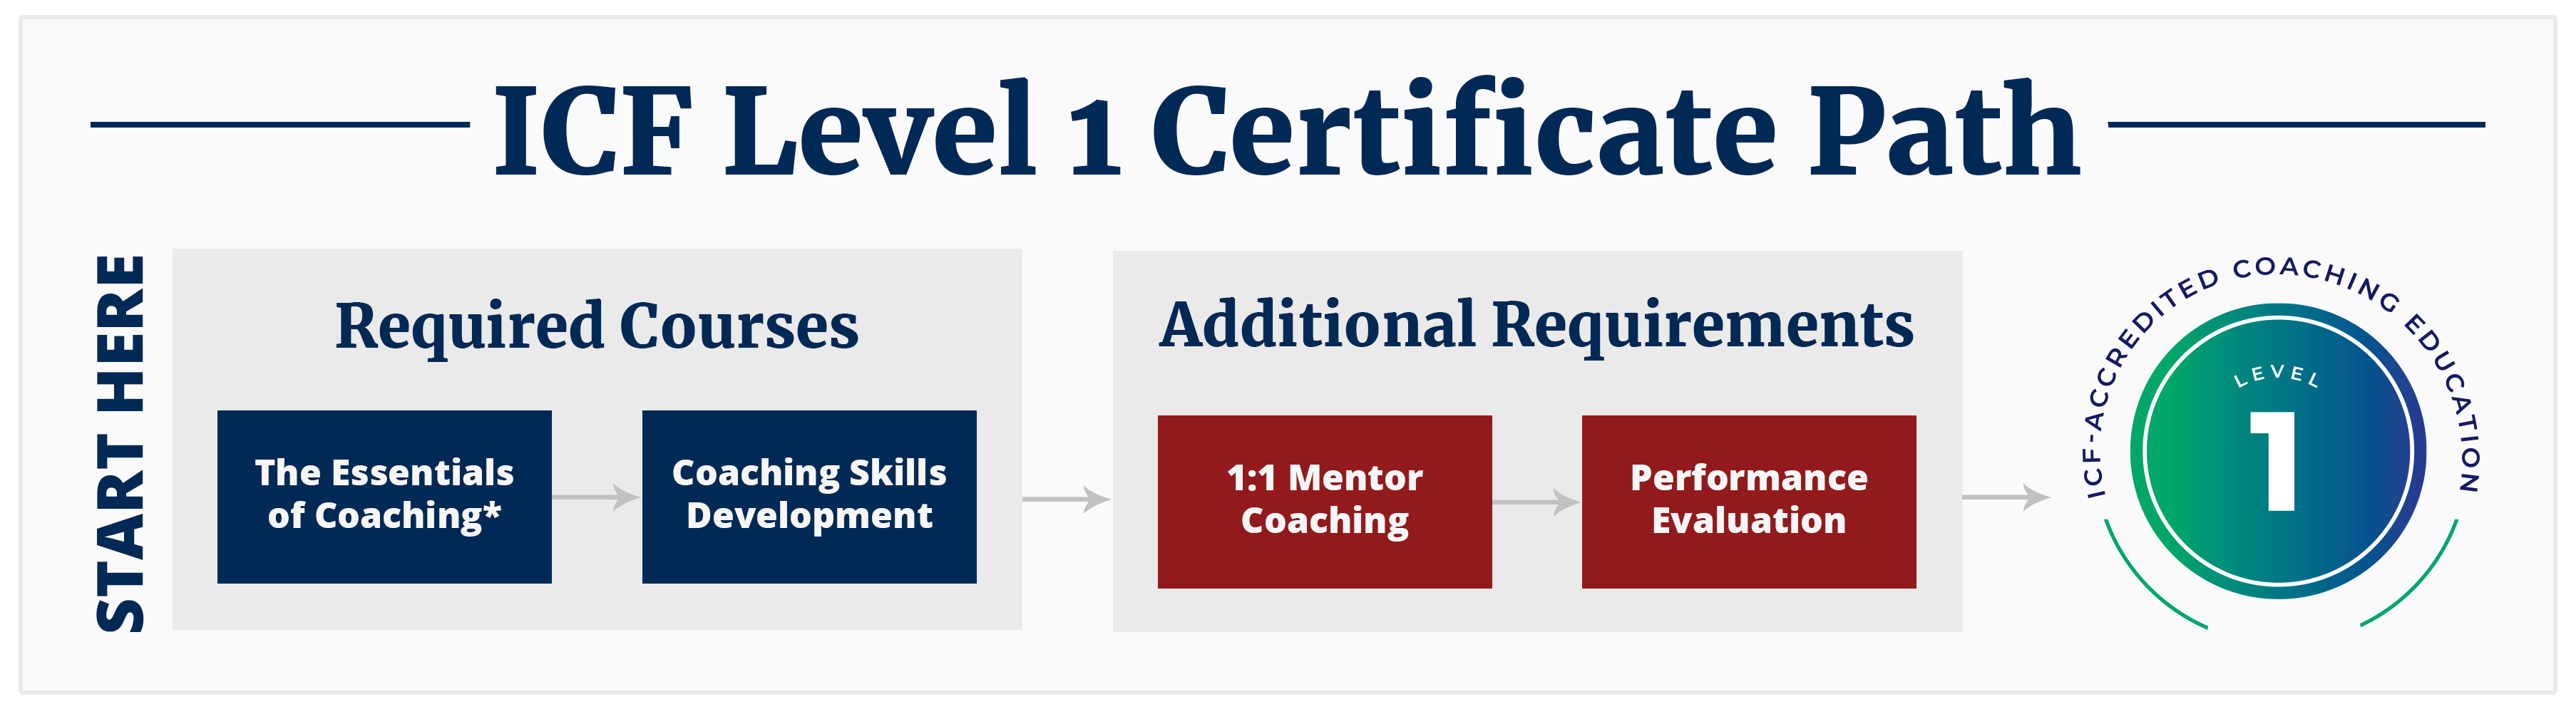 ICF Level 1 Certificate Path